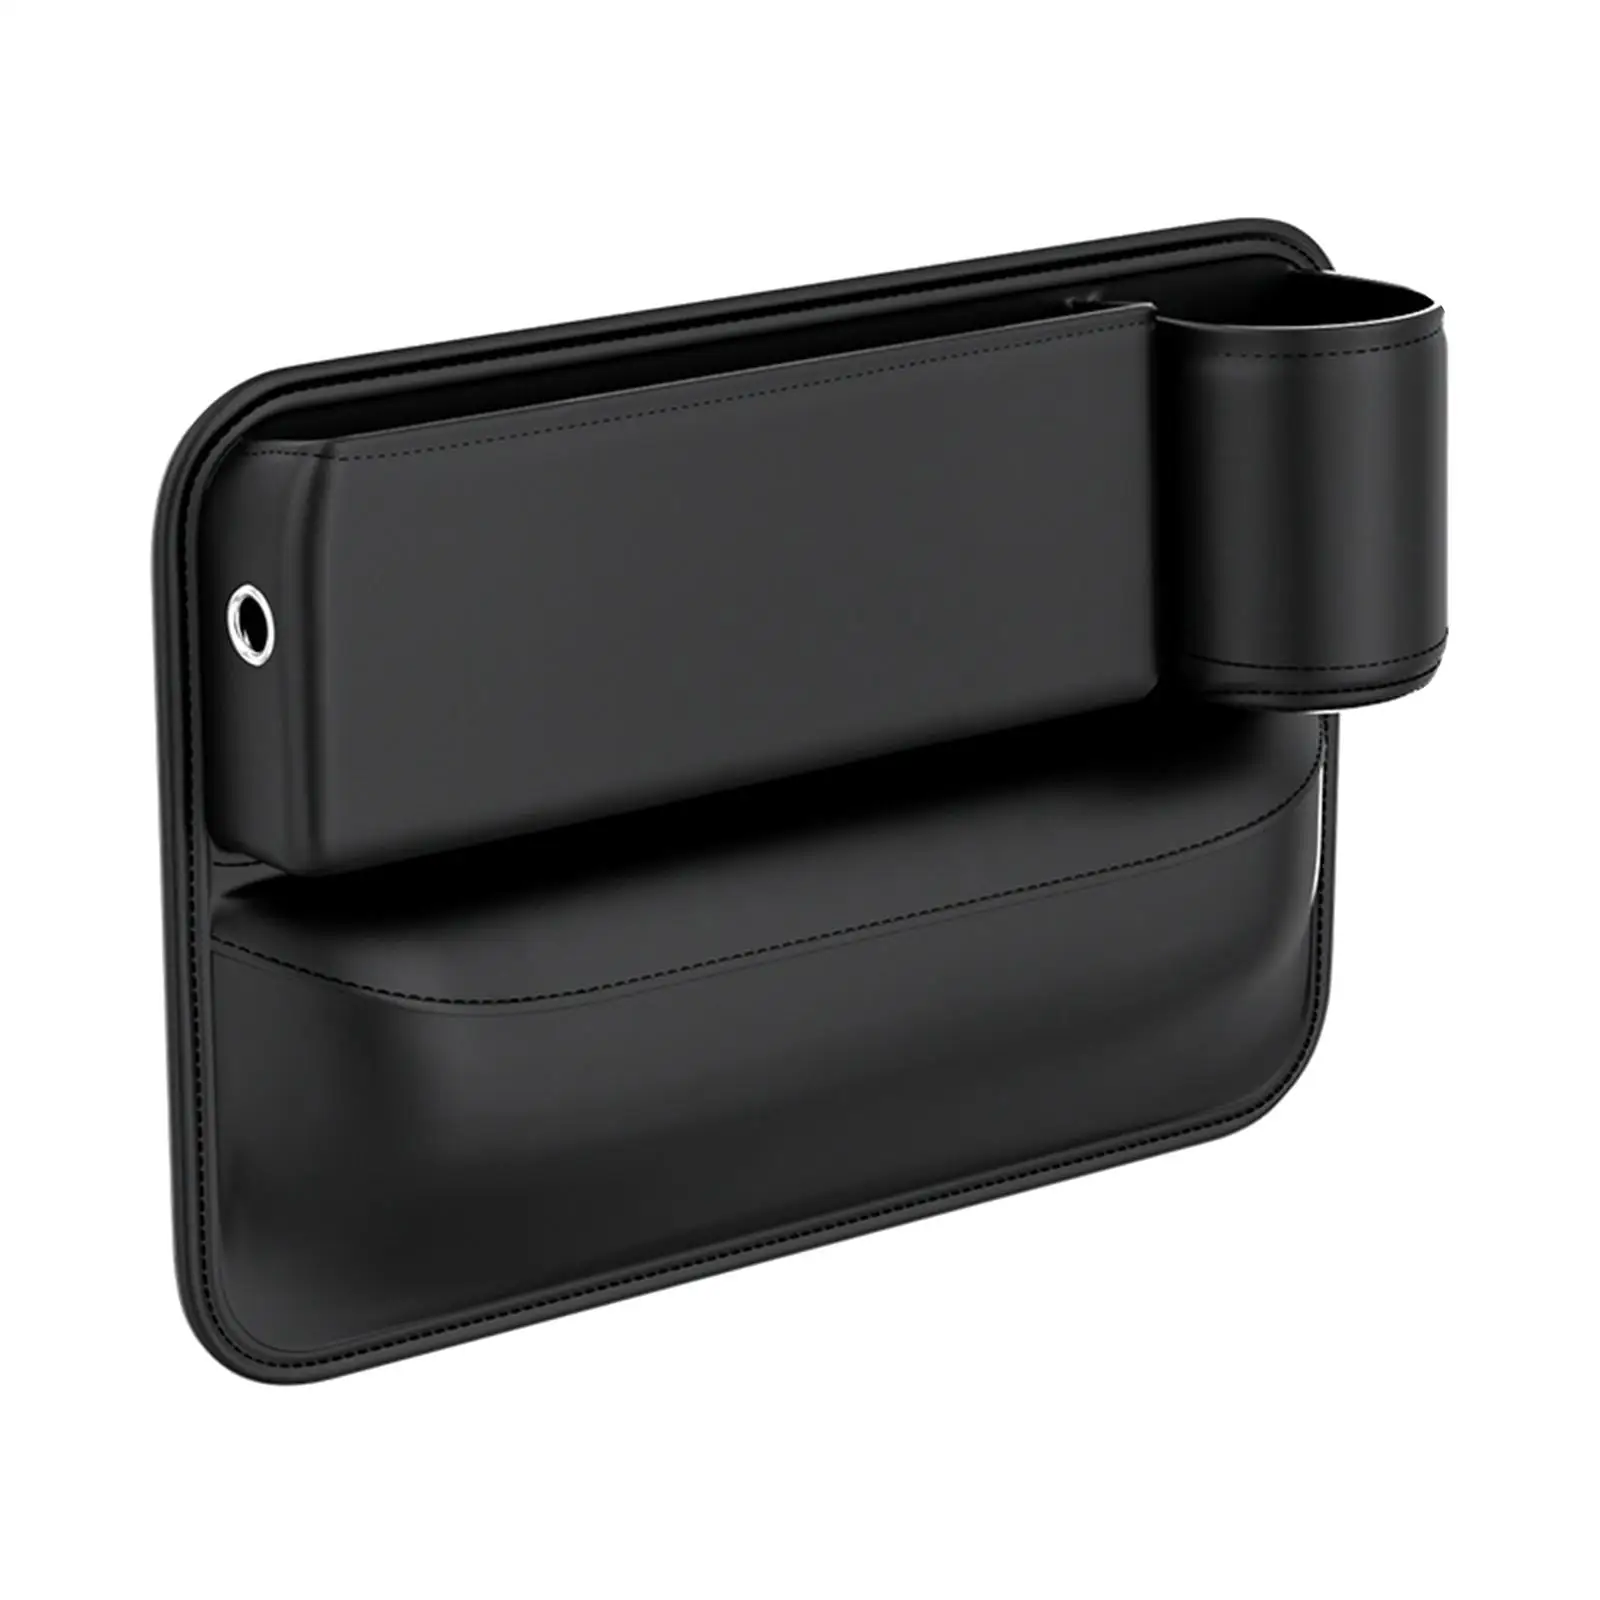 Console Car Seat Gap Filler with Bottle Holder Armrest Storage Box for Cellphone Wallet Small Items Car Accessories Black